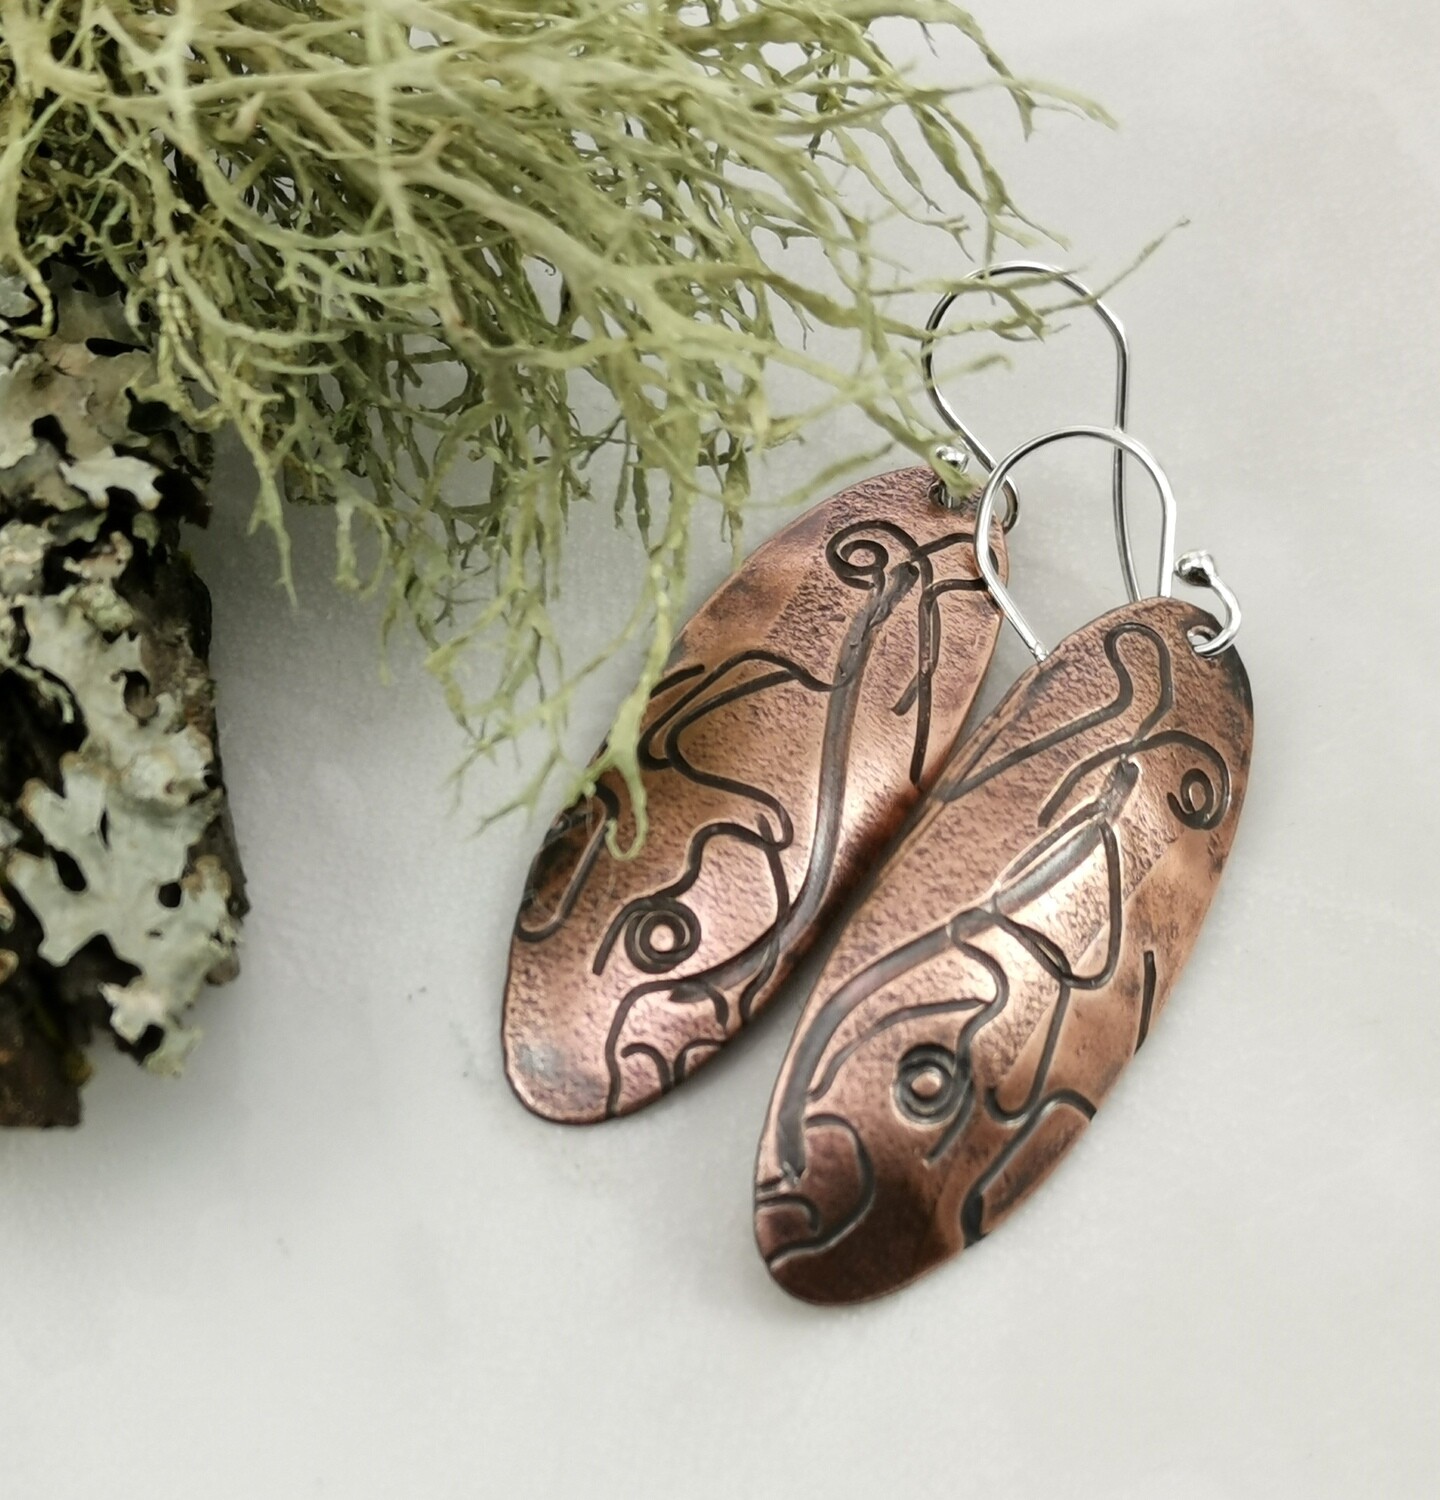 Abstract Jewelry, Textured Earrings, Copper Jewelry, Handmade, Patterned Copper, Patterned Metal, Dangle Earrings, Oval Earrings, One of a Kind, Gifts for Her